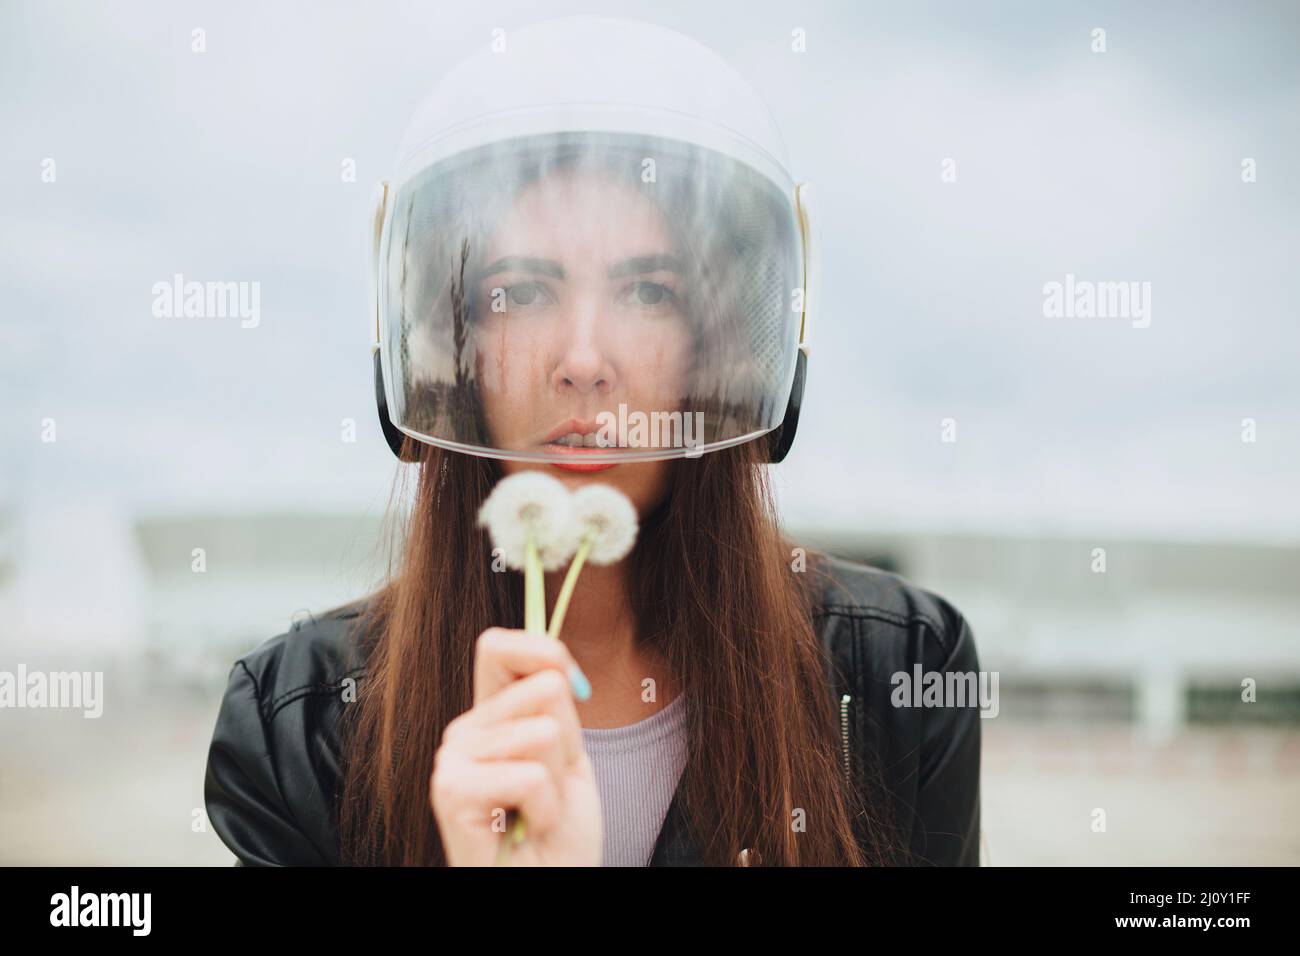 Young woman biker in bike safety helmet and leather outfit with dandelions flowers in hands Stock Photo